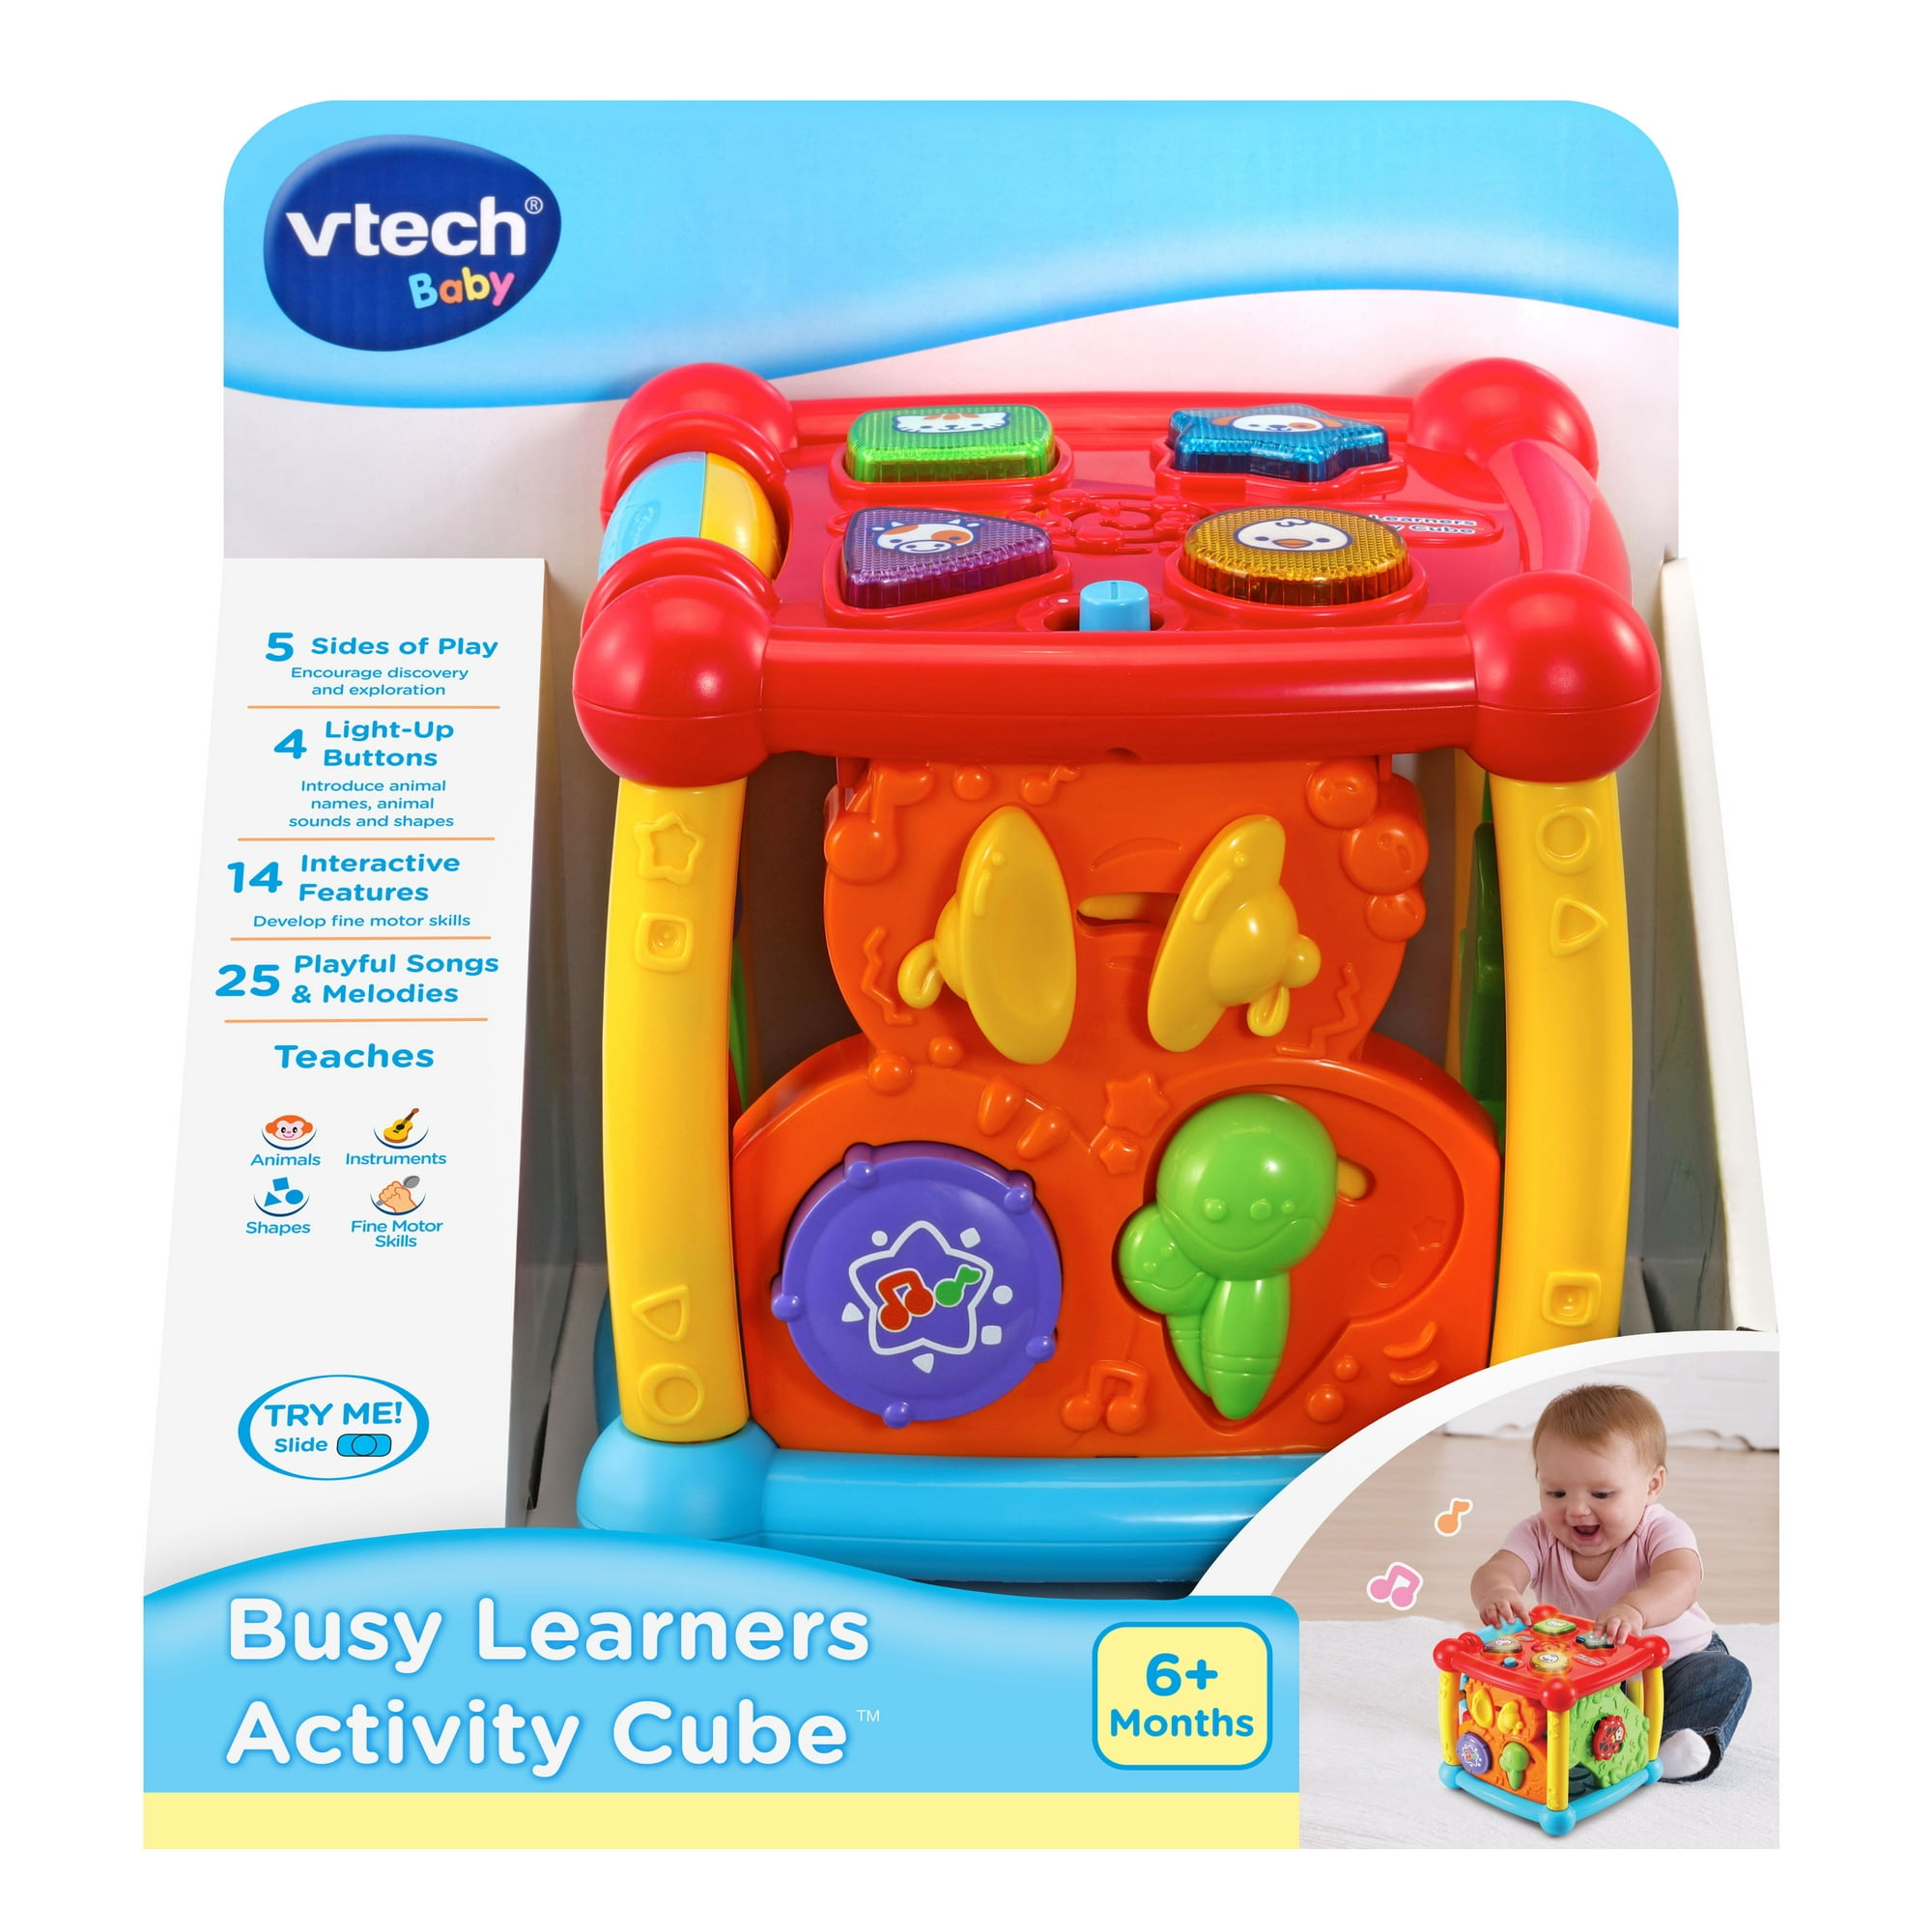 vtech busy learners activity cube walmart